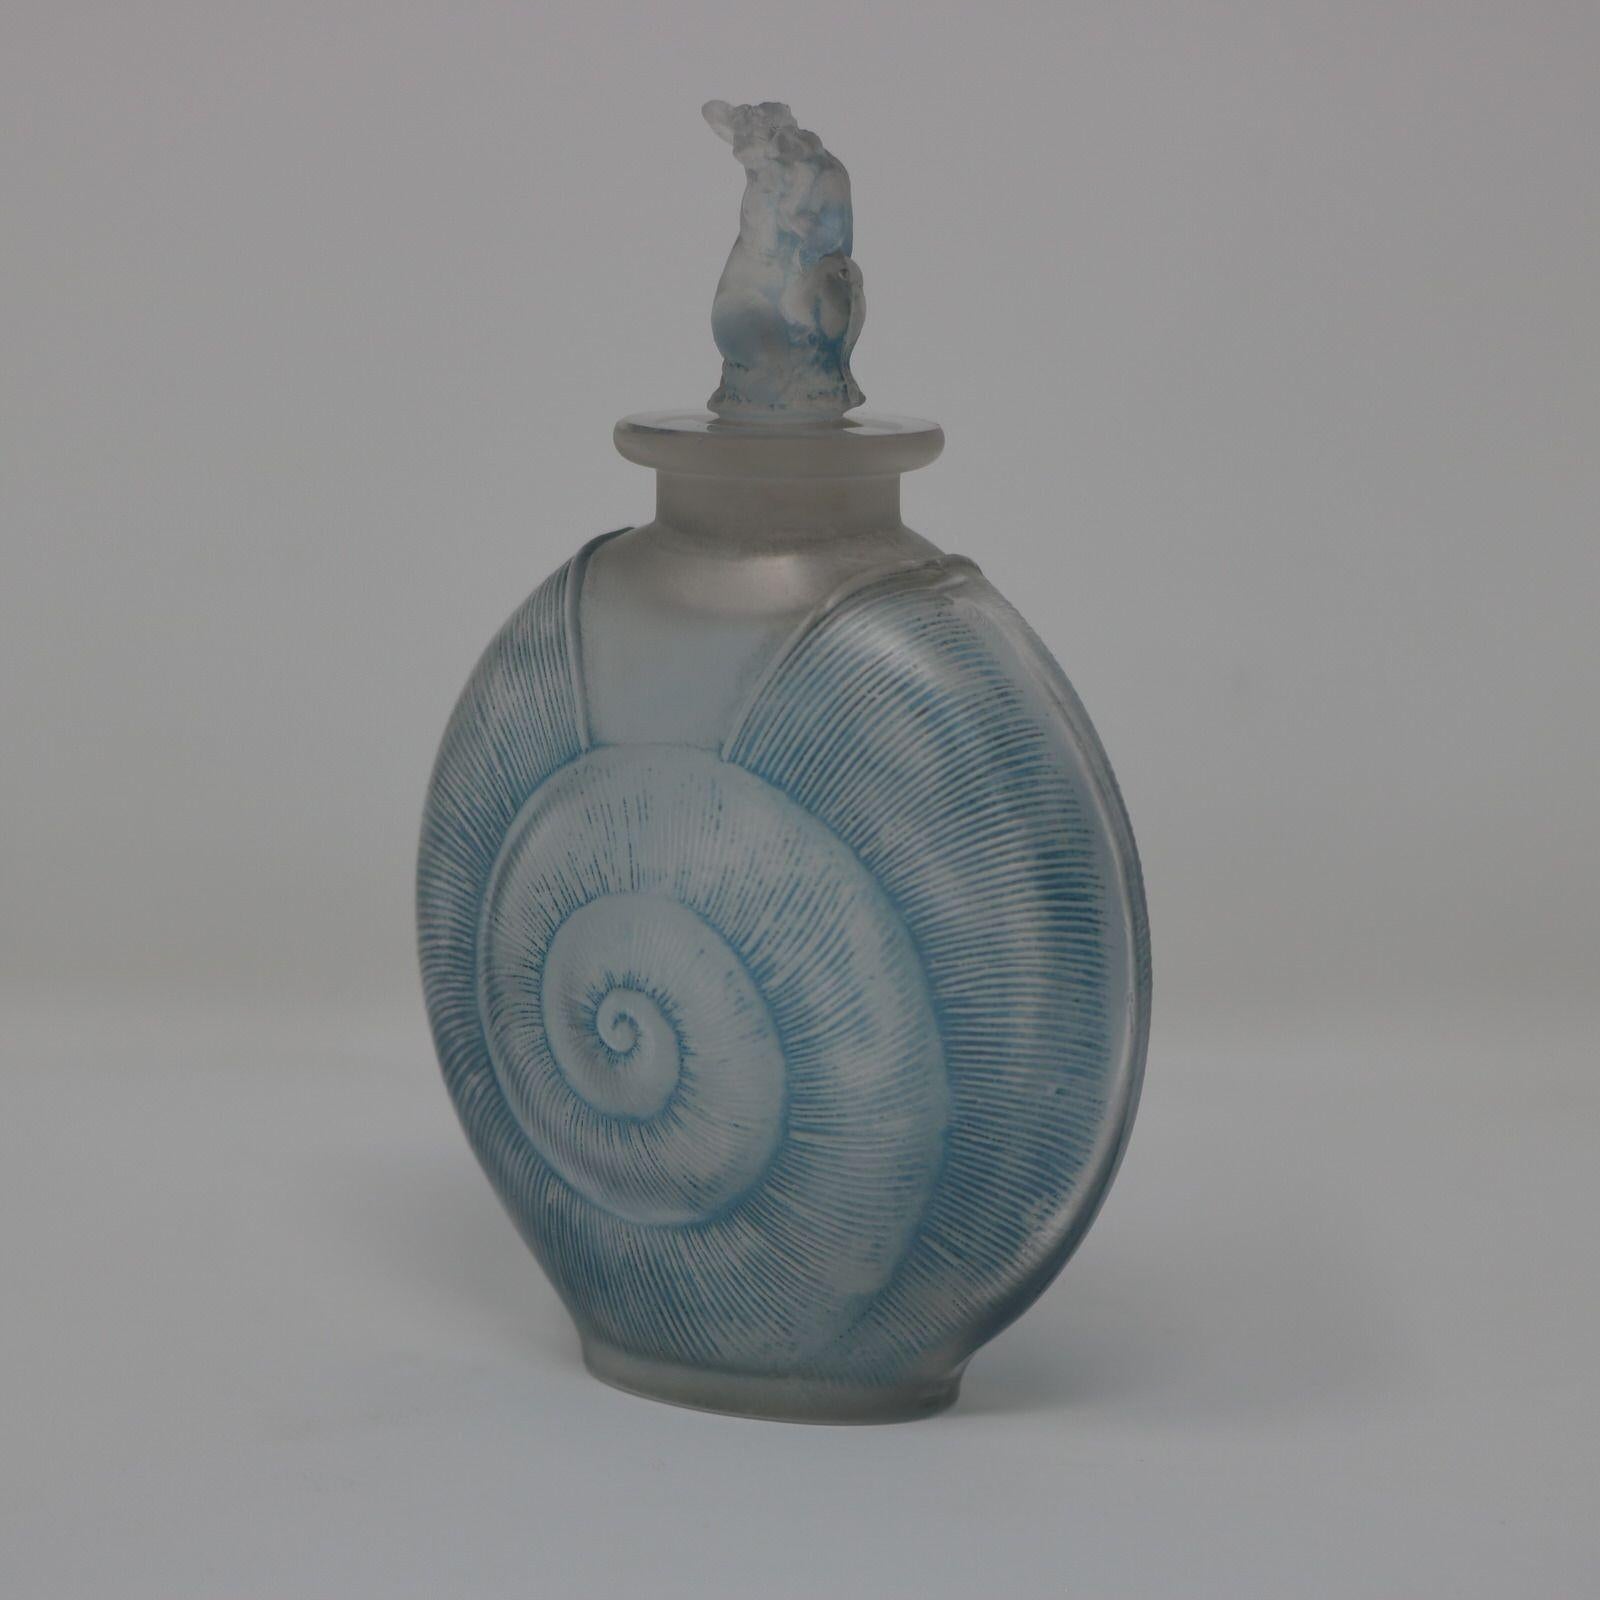 Rene Lalique frosted glass with blue staining 'Amphitrite' Perfume bottle. The bottle is molded in the form of a shell. The stopper has a naked female in a crouching pose. She represents the greek goddess Amphitrite. In ancient Greek mythology,